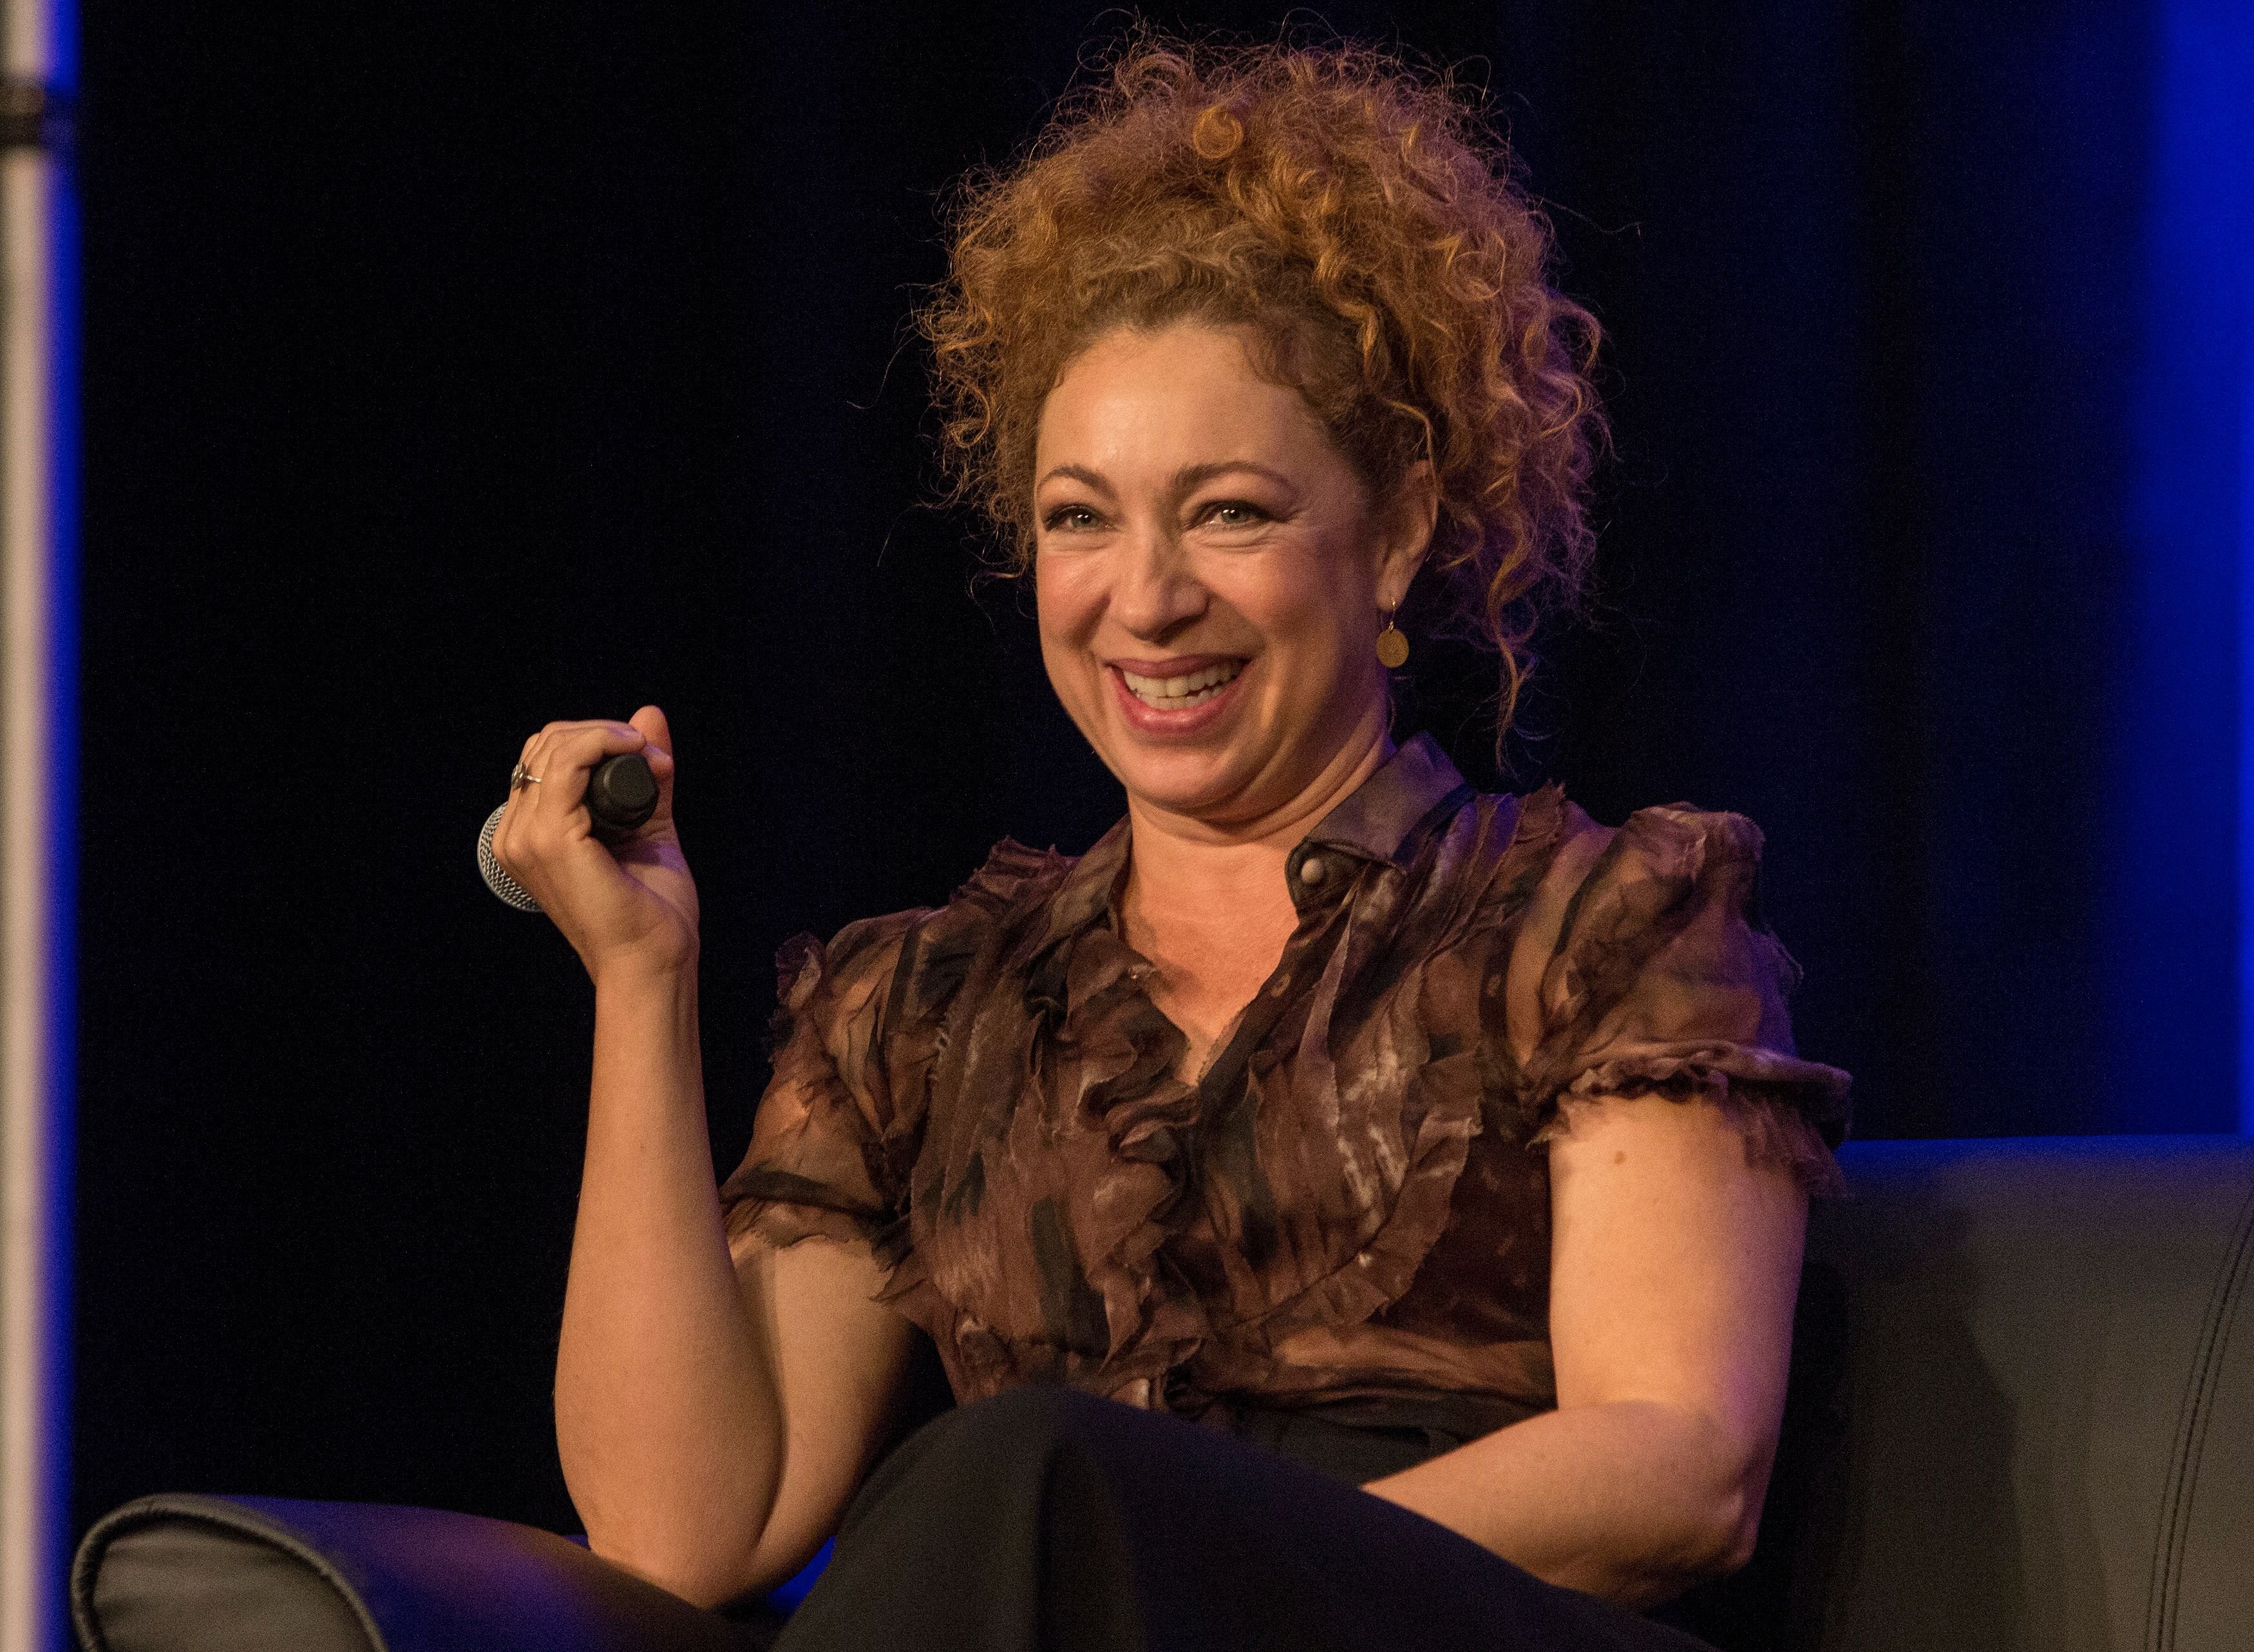 Alex Kingston drops by the Wizard World Chicago Comic-Con at Donald E. Stephens Convention Center on August 27, 2017 in Rosemont, Illinois. | Source: Getty Images